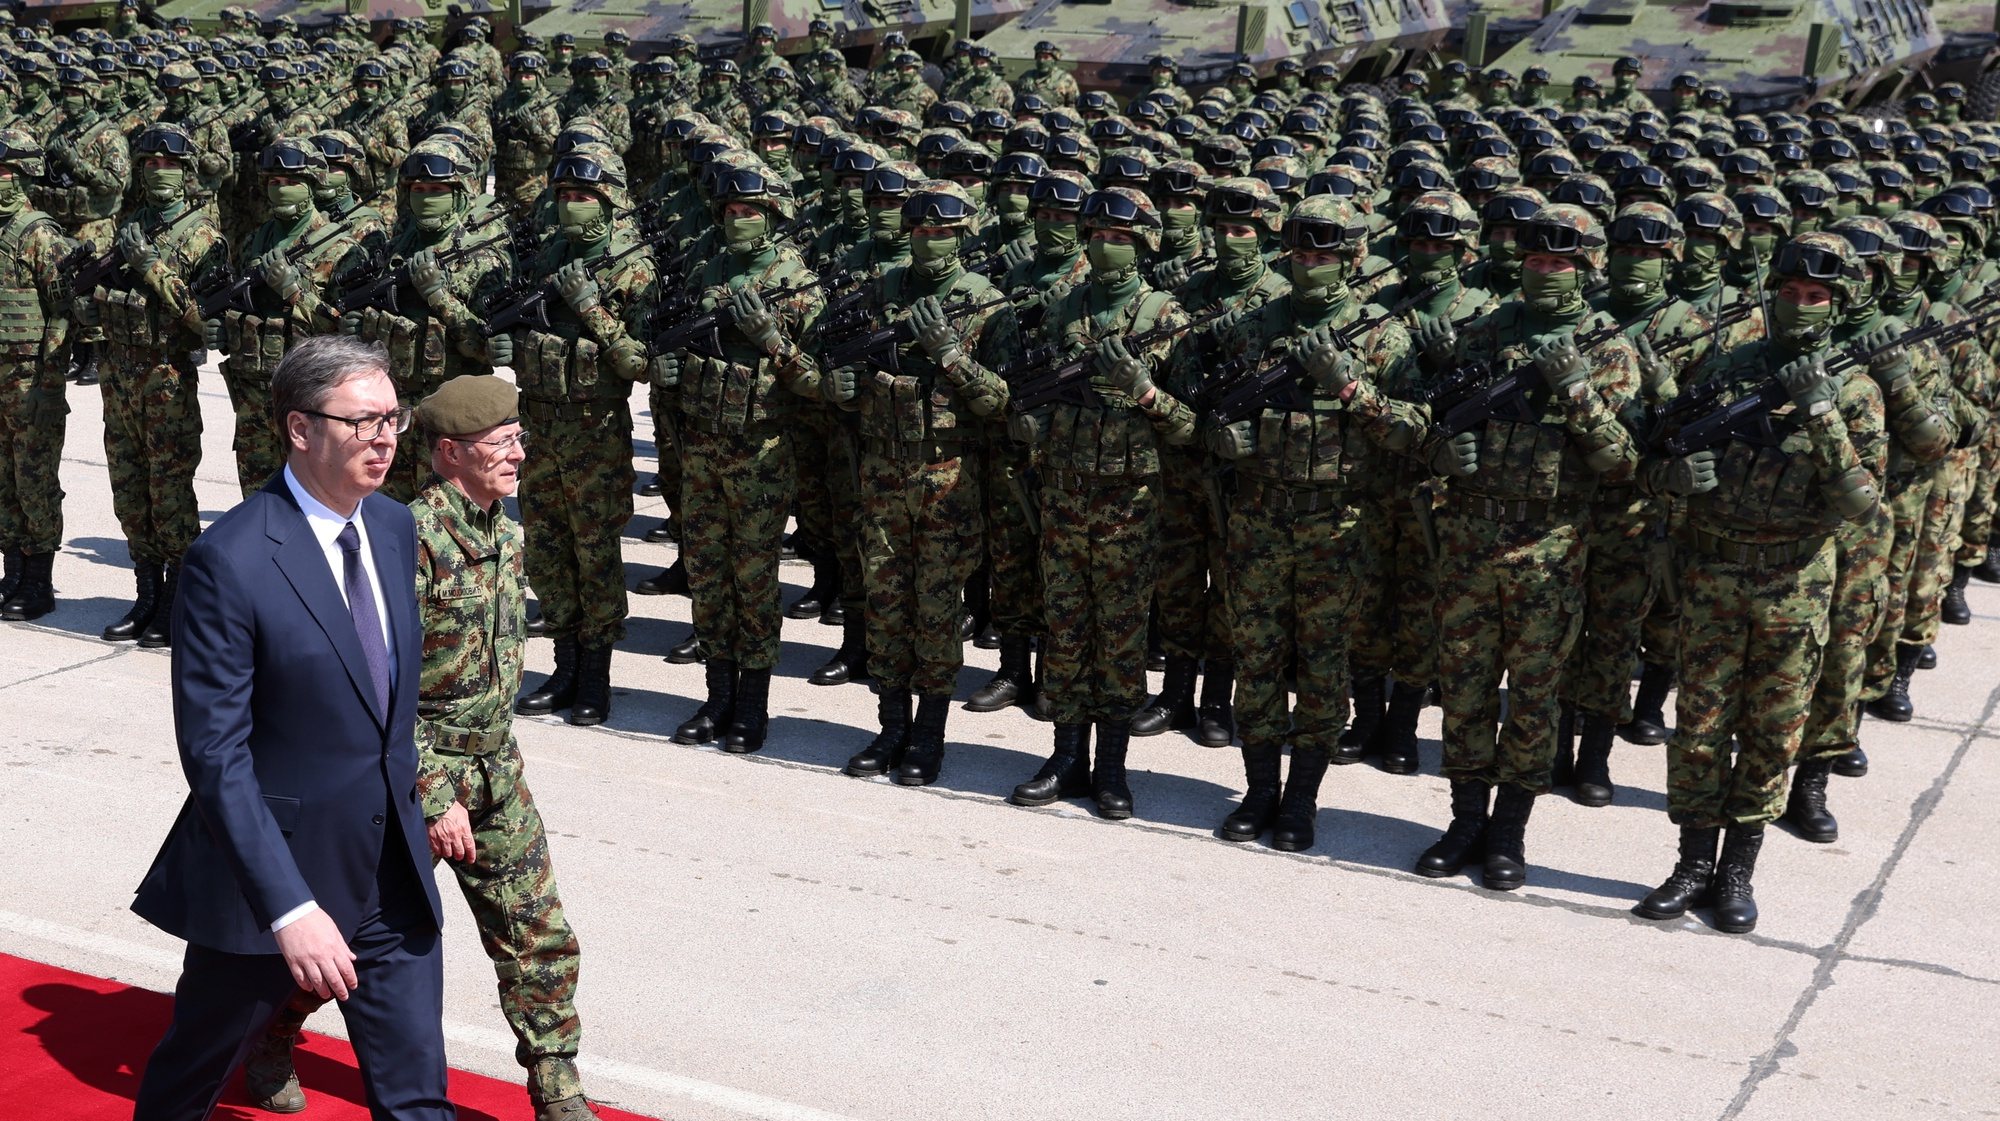 epa10585790 Serbian President Aleksandar Vucic (L) and Army Chief of Staff Milan Mojsilovic (2-L) inspect the troops during the Serbian Armed Forces capabilities demonstration &#039;Granit 2023&#039; at the Batajnica military airport near Belgrade, Serbia, 22 April 2023. The capabilities presentation was arranged on the occasion of the Serbian Armed Forces Day, that is annually marked on 23 April. It marks the begin of the Second Serbian Uprising in 1815 which is regarded &#039;a milestone in the creation of the modern Serbian state and military&#039;.  EPA/ANDREJ CUKIC